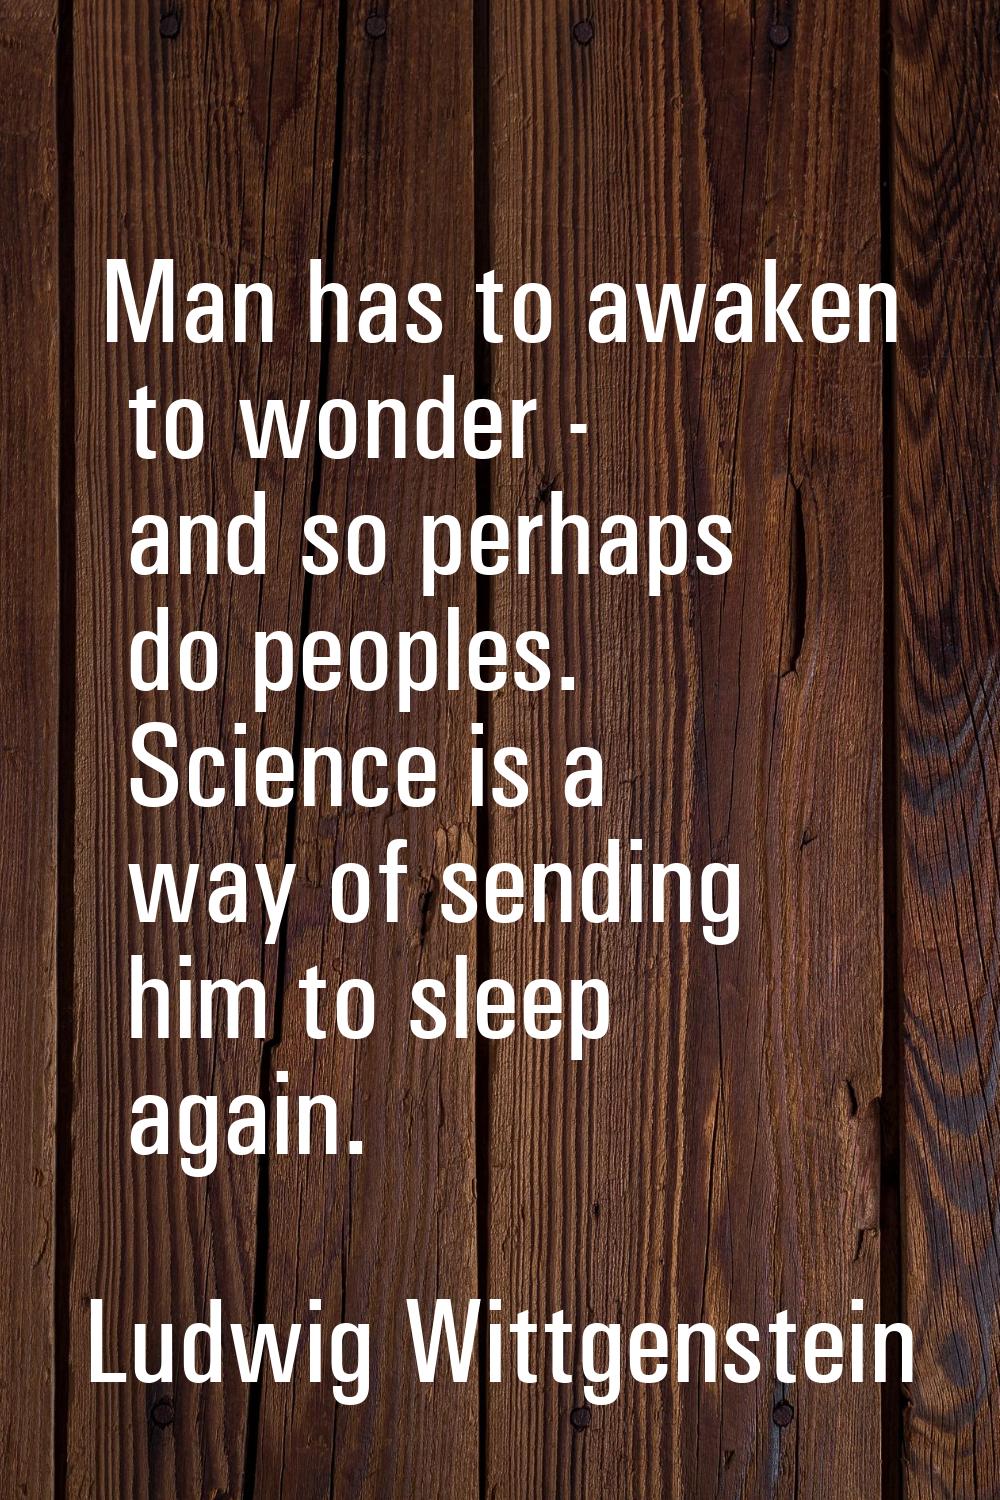 Man has to awaken to wonder - and so perhaps do peoples. Science is a way of sending him to sleep a